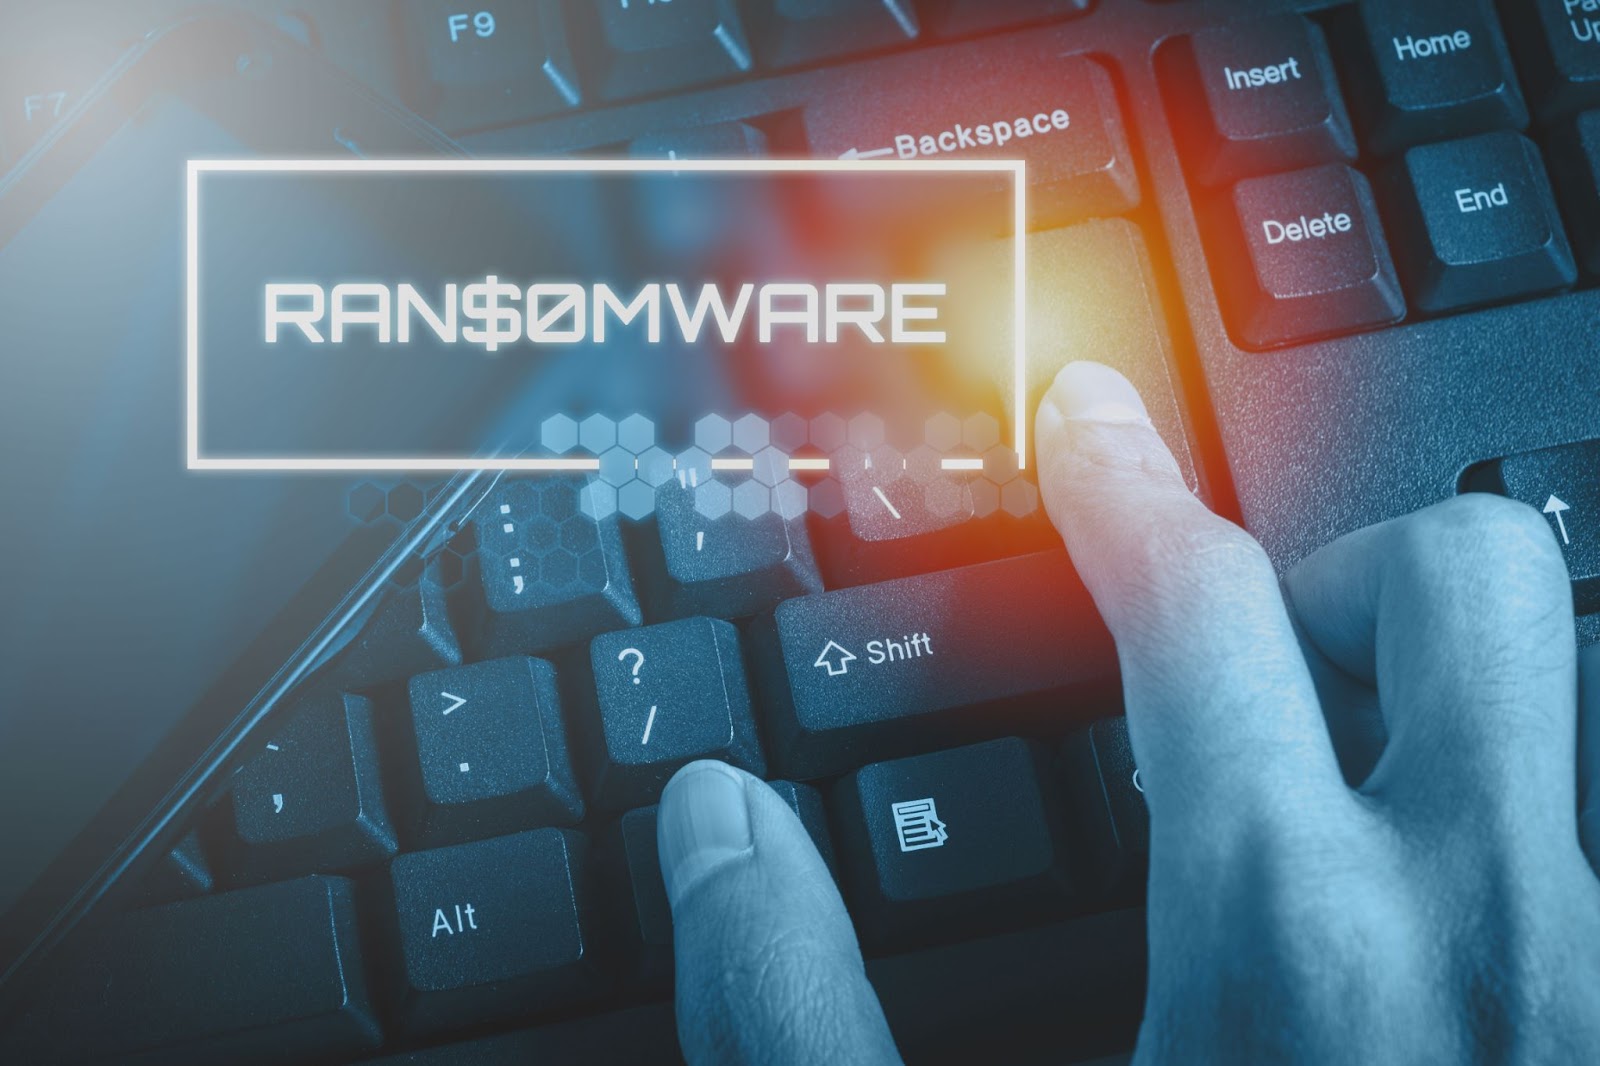 Ransomware Prevention and Removal